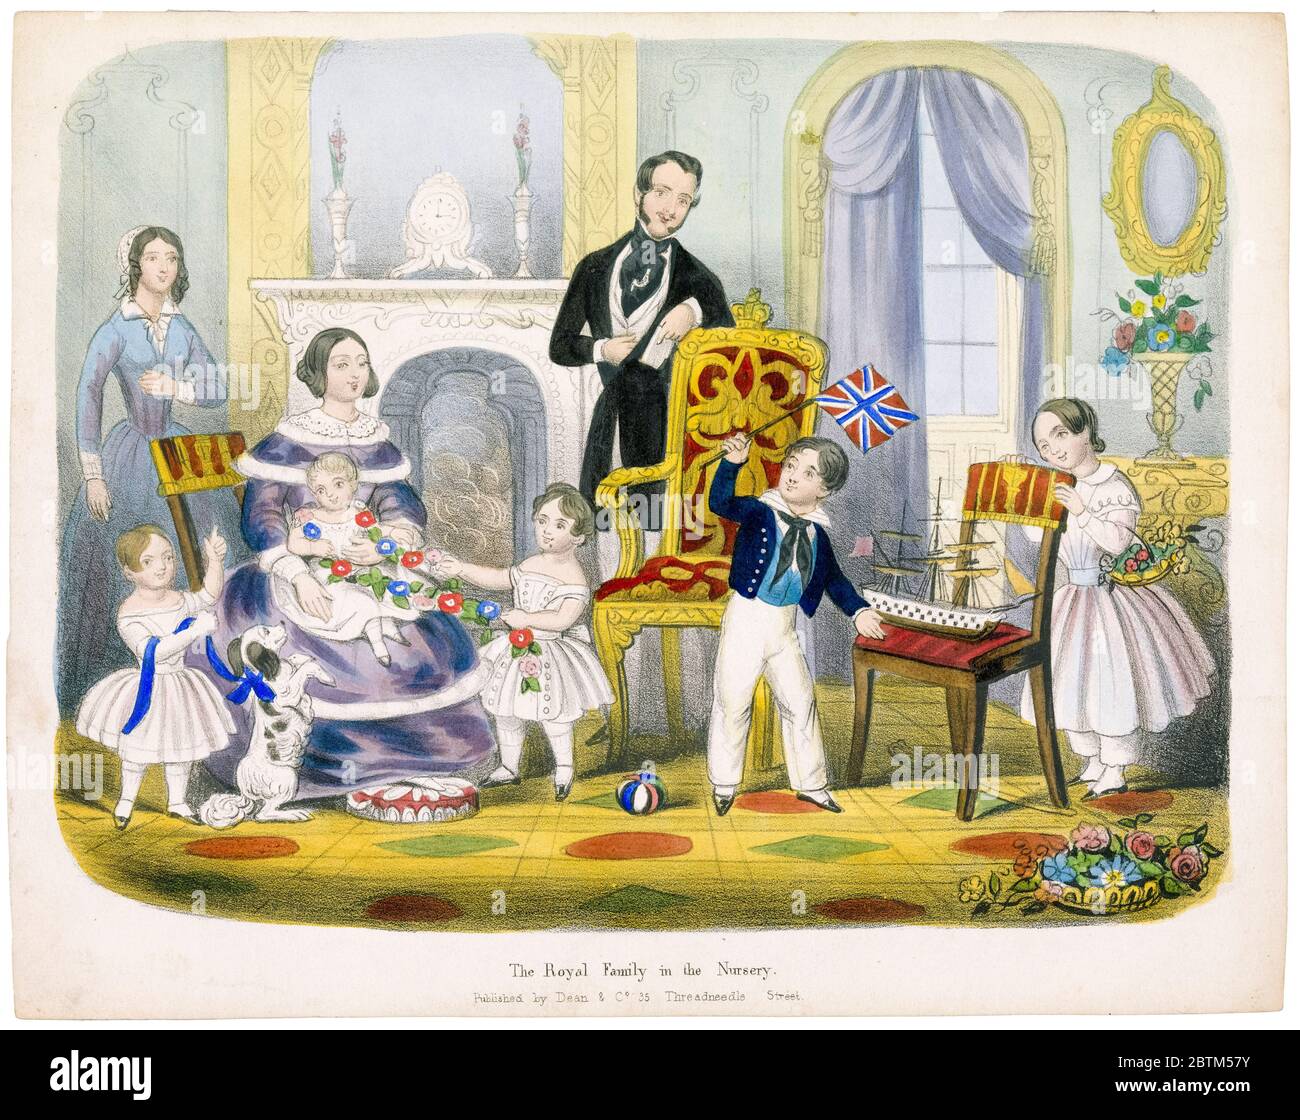 Royal family in the nursery: Queen Victoria, Prince Albert, and their children, print by Dean & Co, circa 1845 Stock Photo